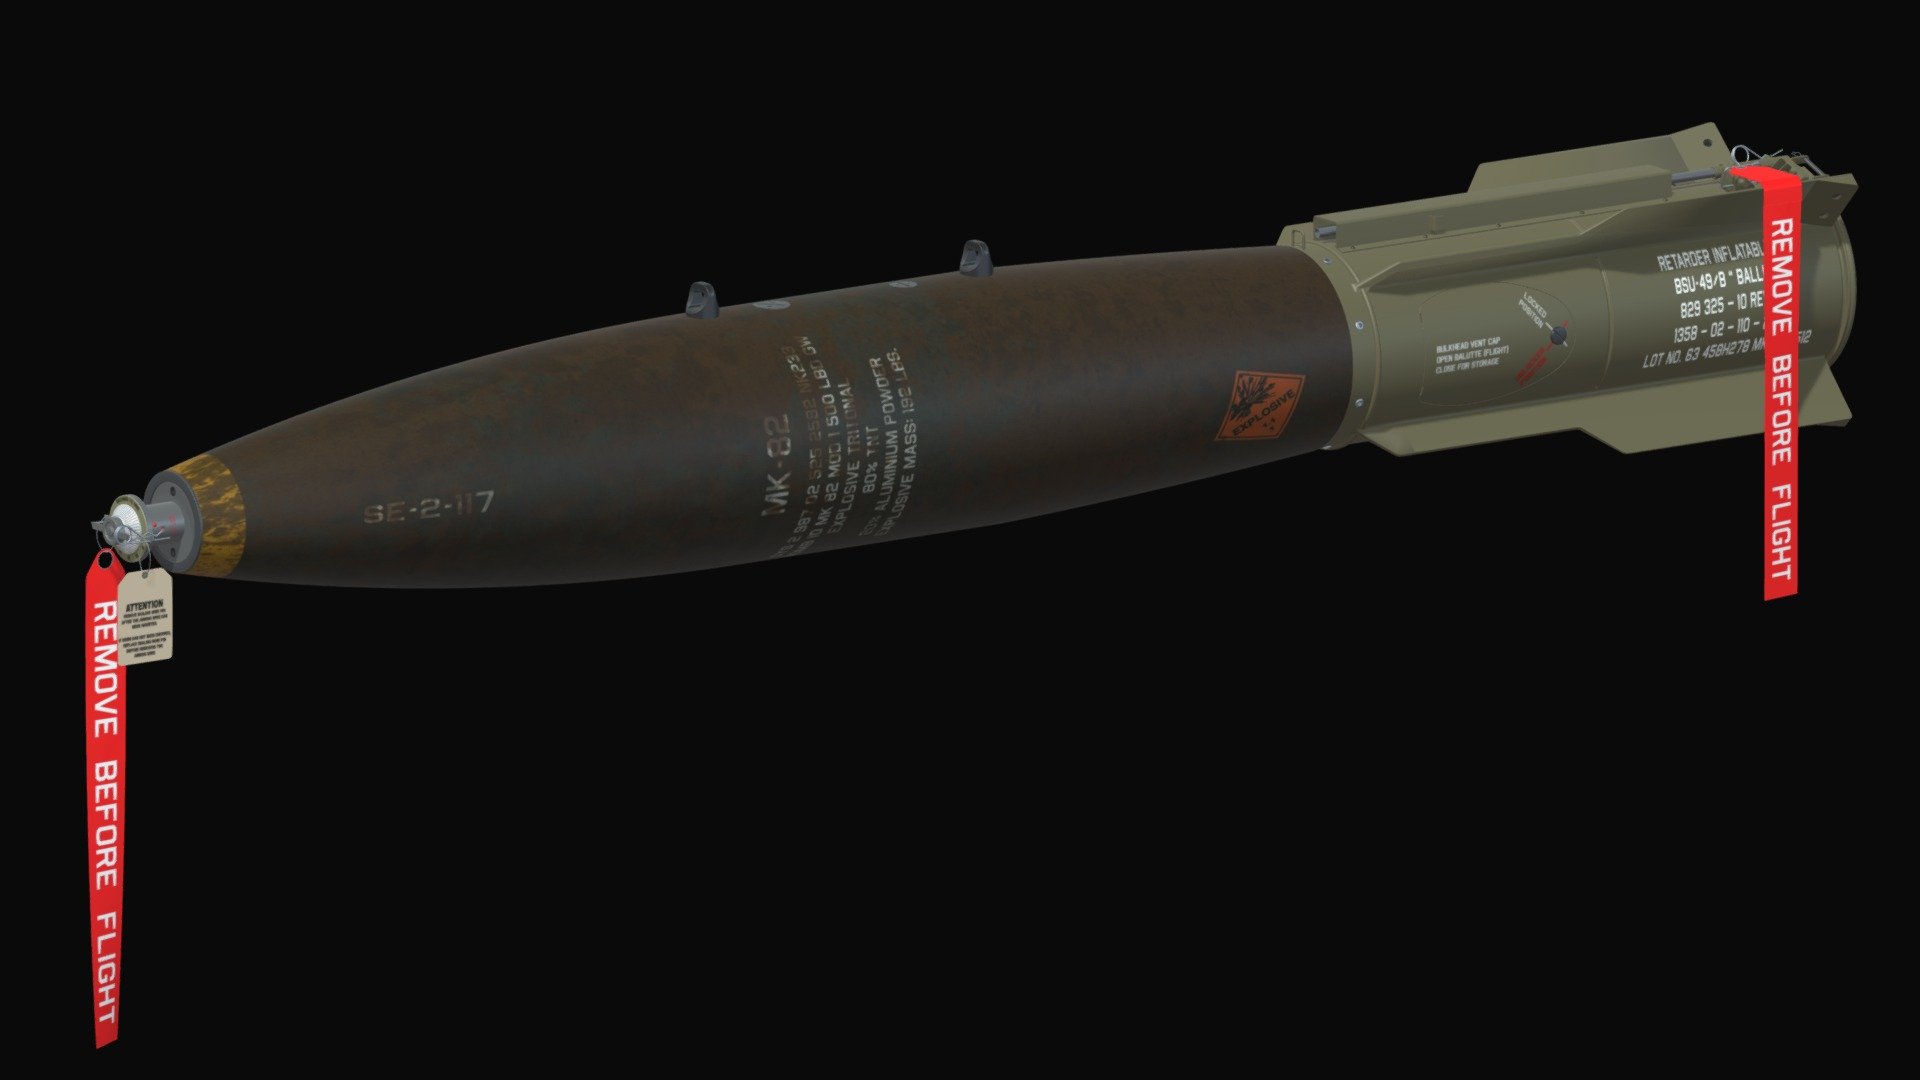 Mk.82/BSU-49 Ballute is a high drag gravity bomb of US Army. Modelled by Edgar Brito 3d model